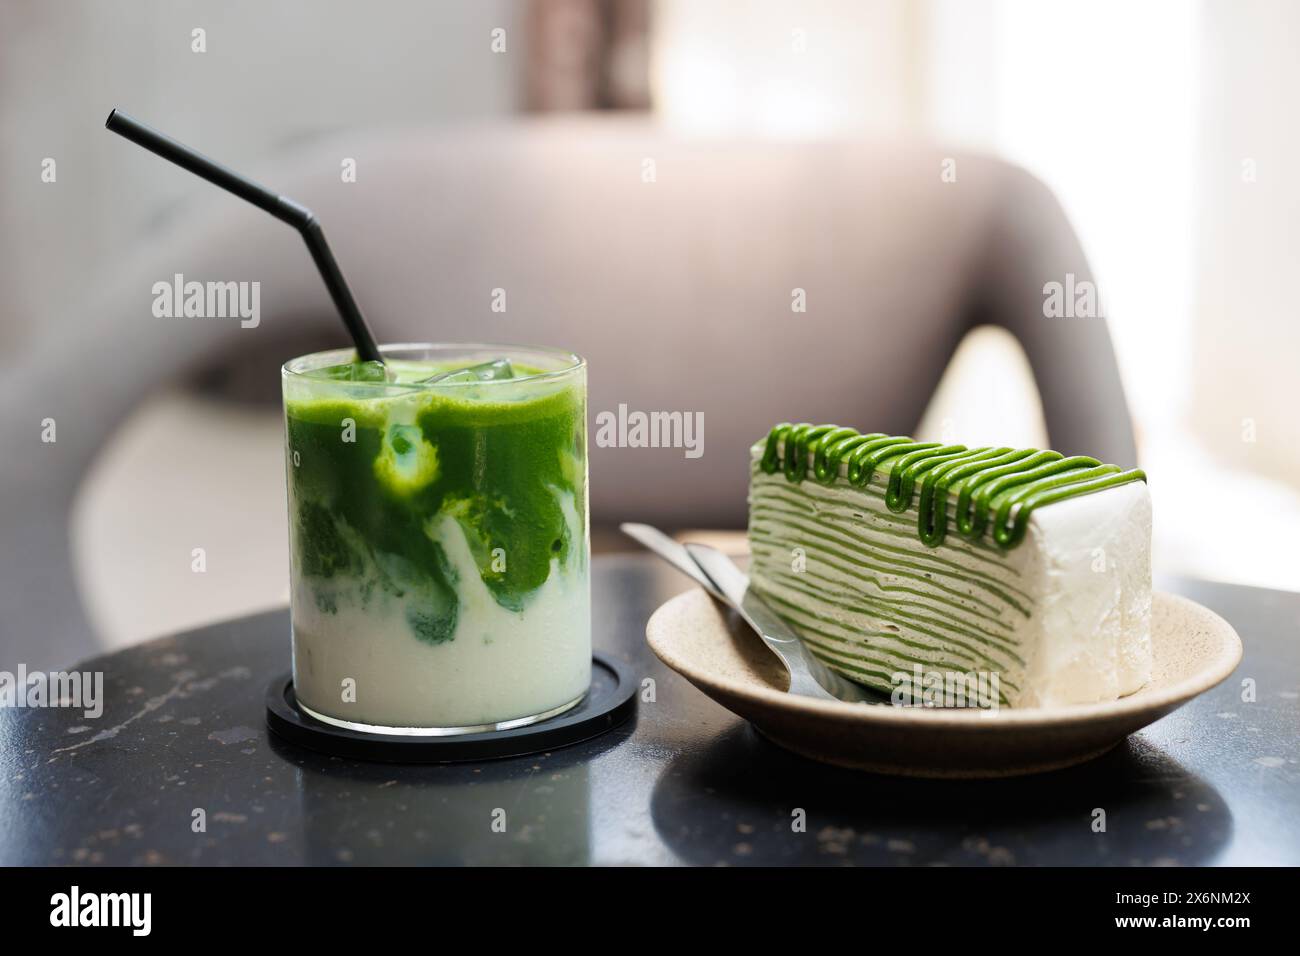 Matcha Green Tea sweet food and drinks products serve at cafe, Green crepe layer cake and iced latte green tea closeup on the table. Stock Photo